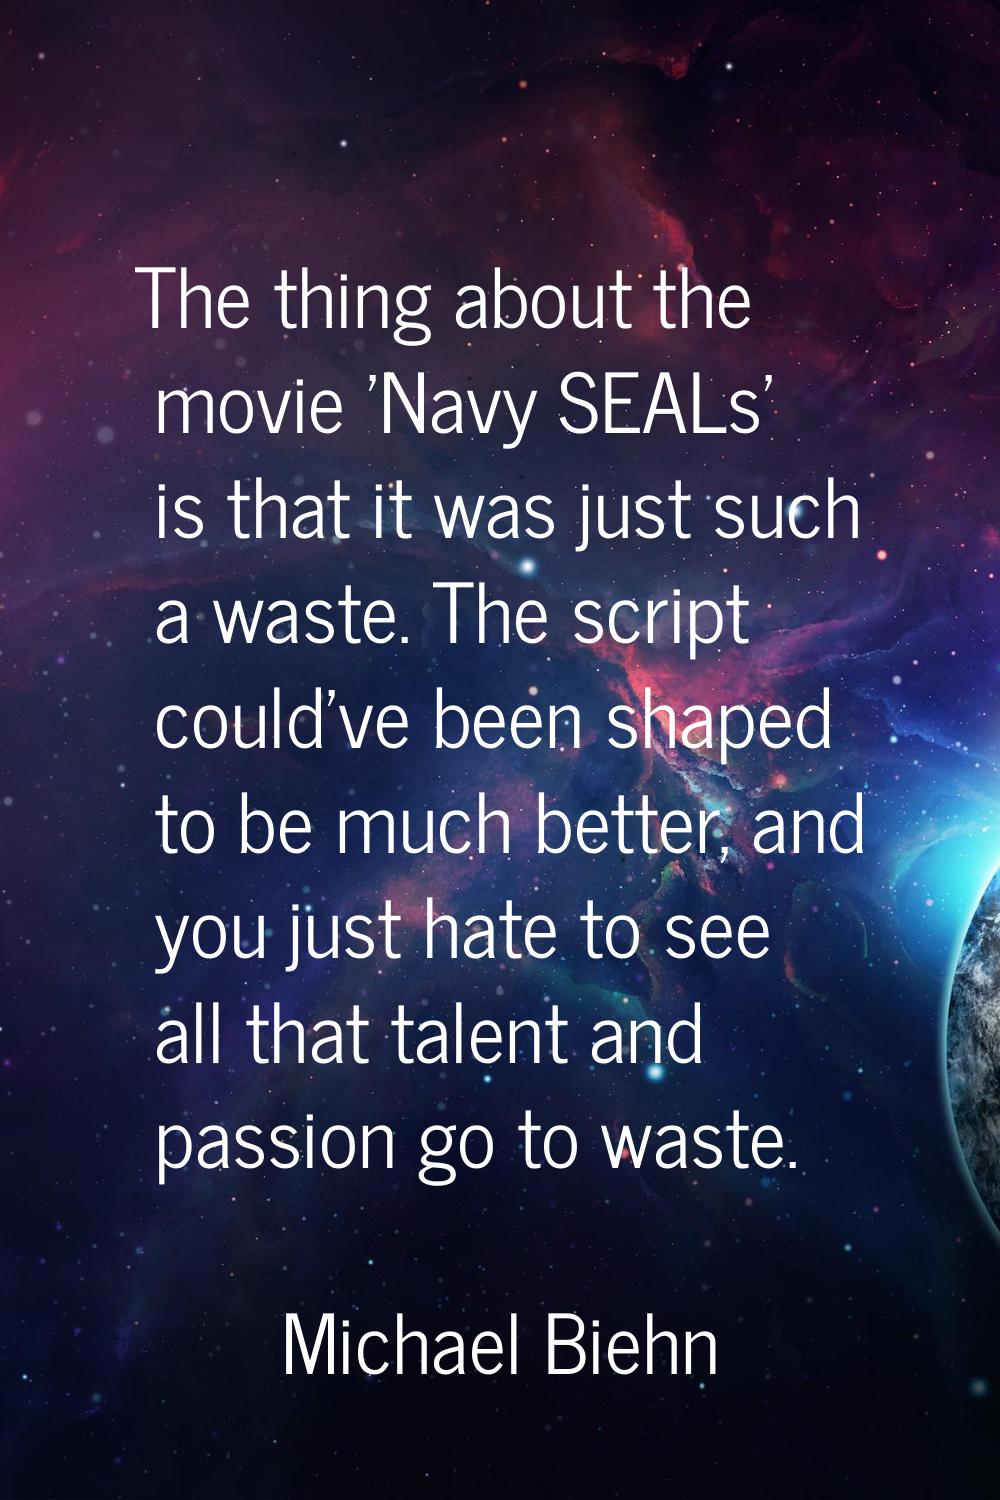 The thing about the movie 'Navy SEALs' is that it was just such a waste. The script could've been s